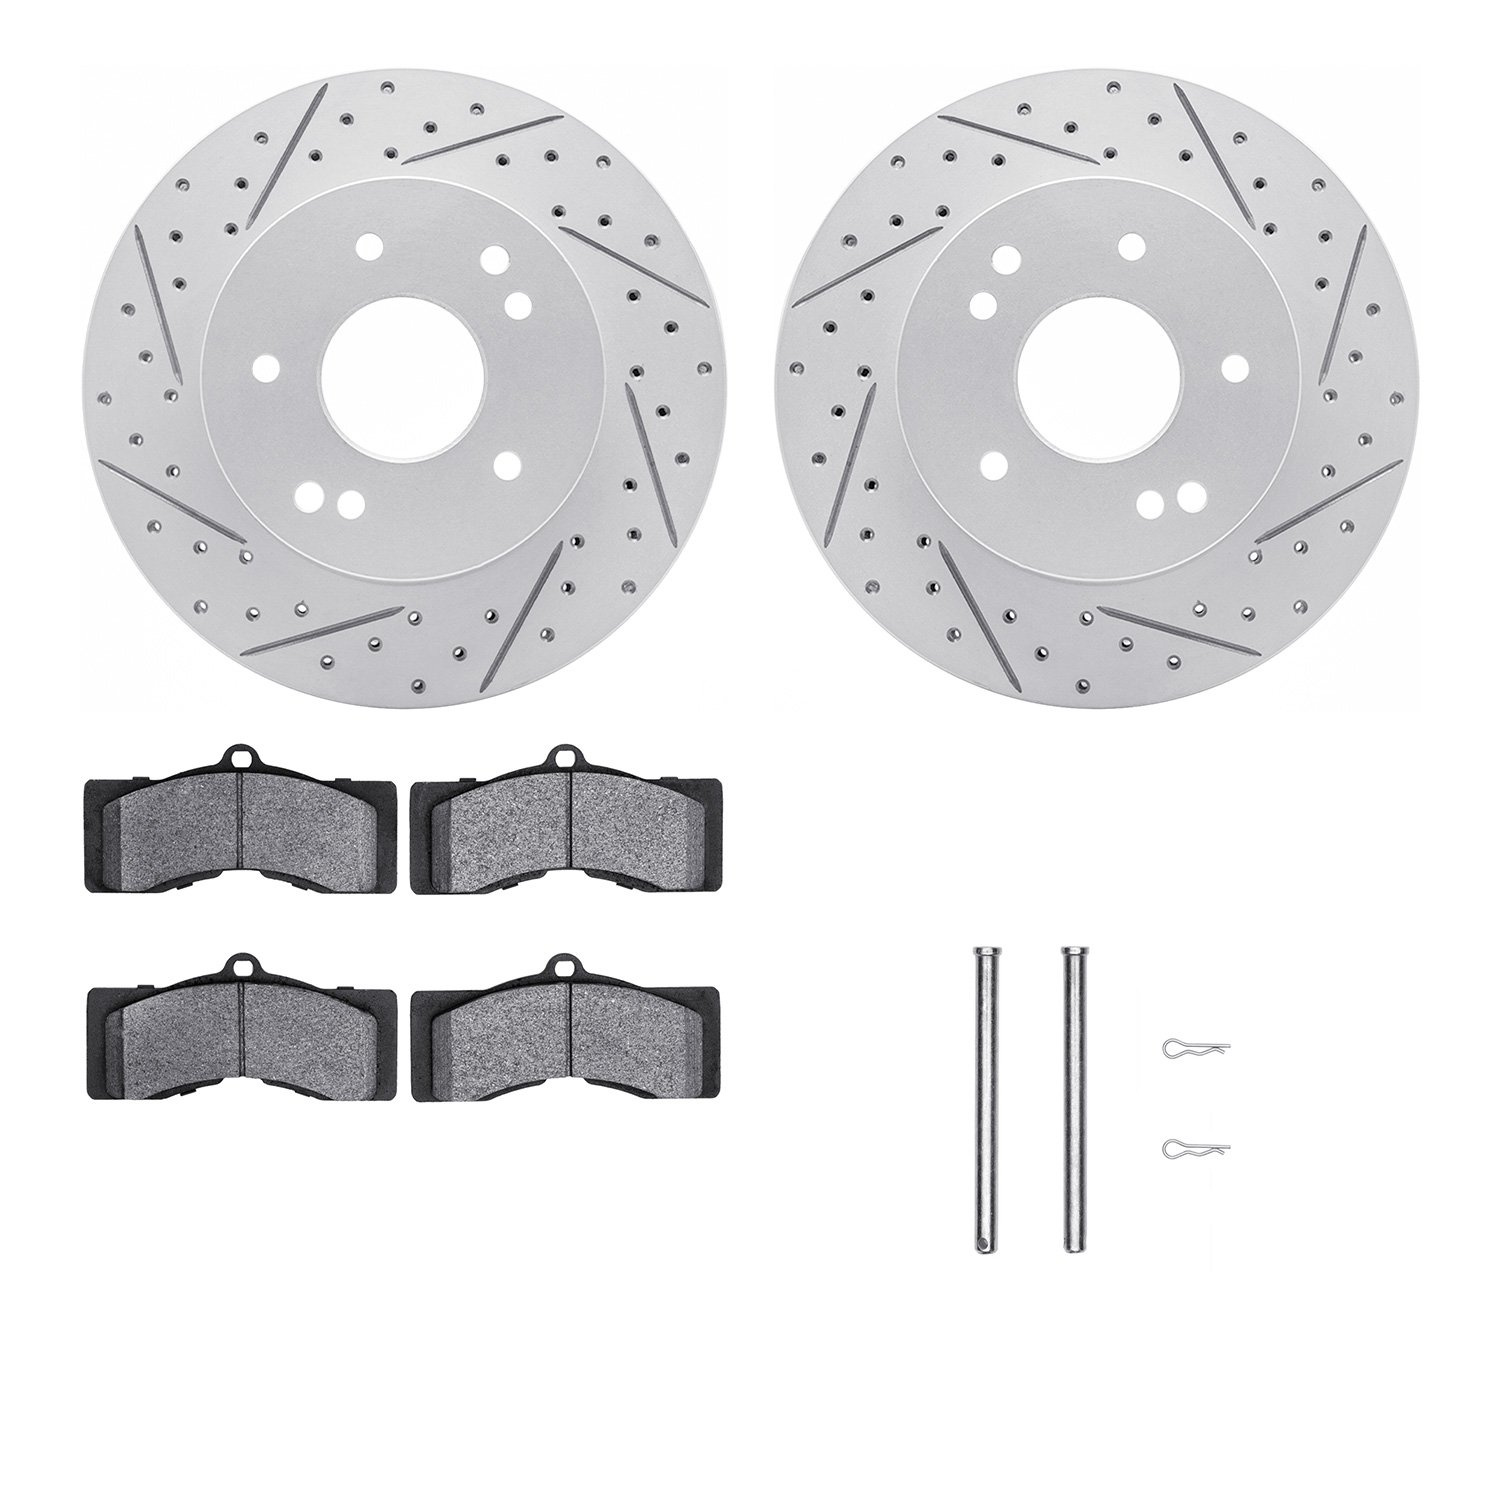 2512-47003 Geoperformance Drilled/Slotted Rotors w/5000 Advanced Brake Pads Kit & Hardware, 1963-1982 GM, Position: Front, Rear